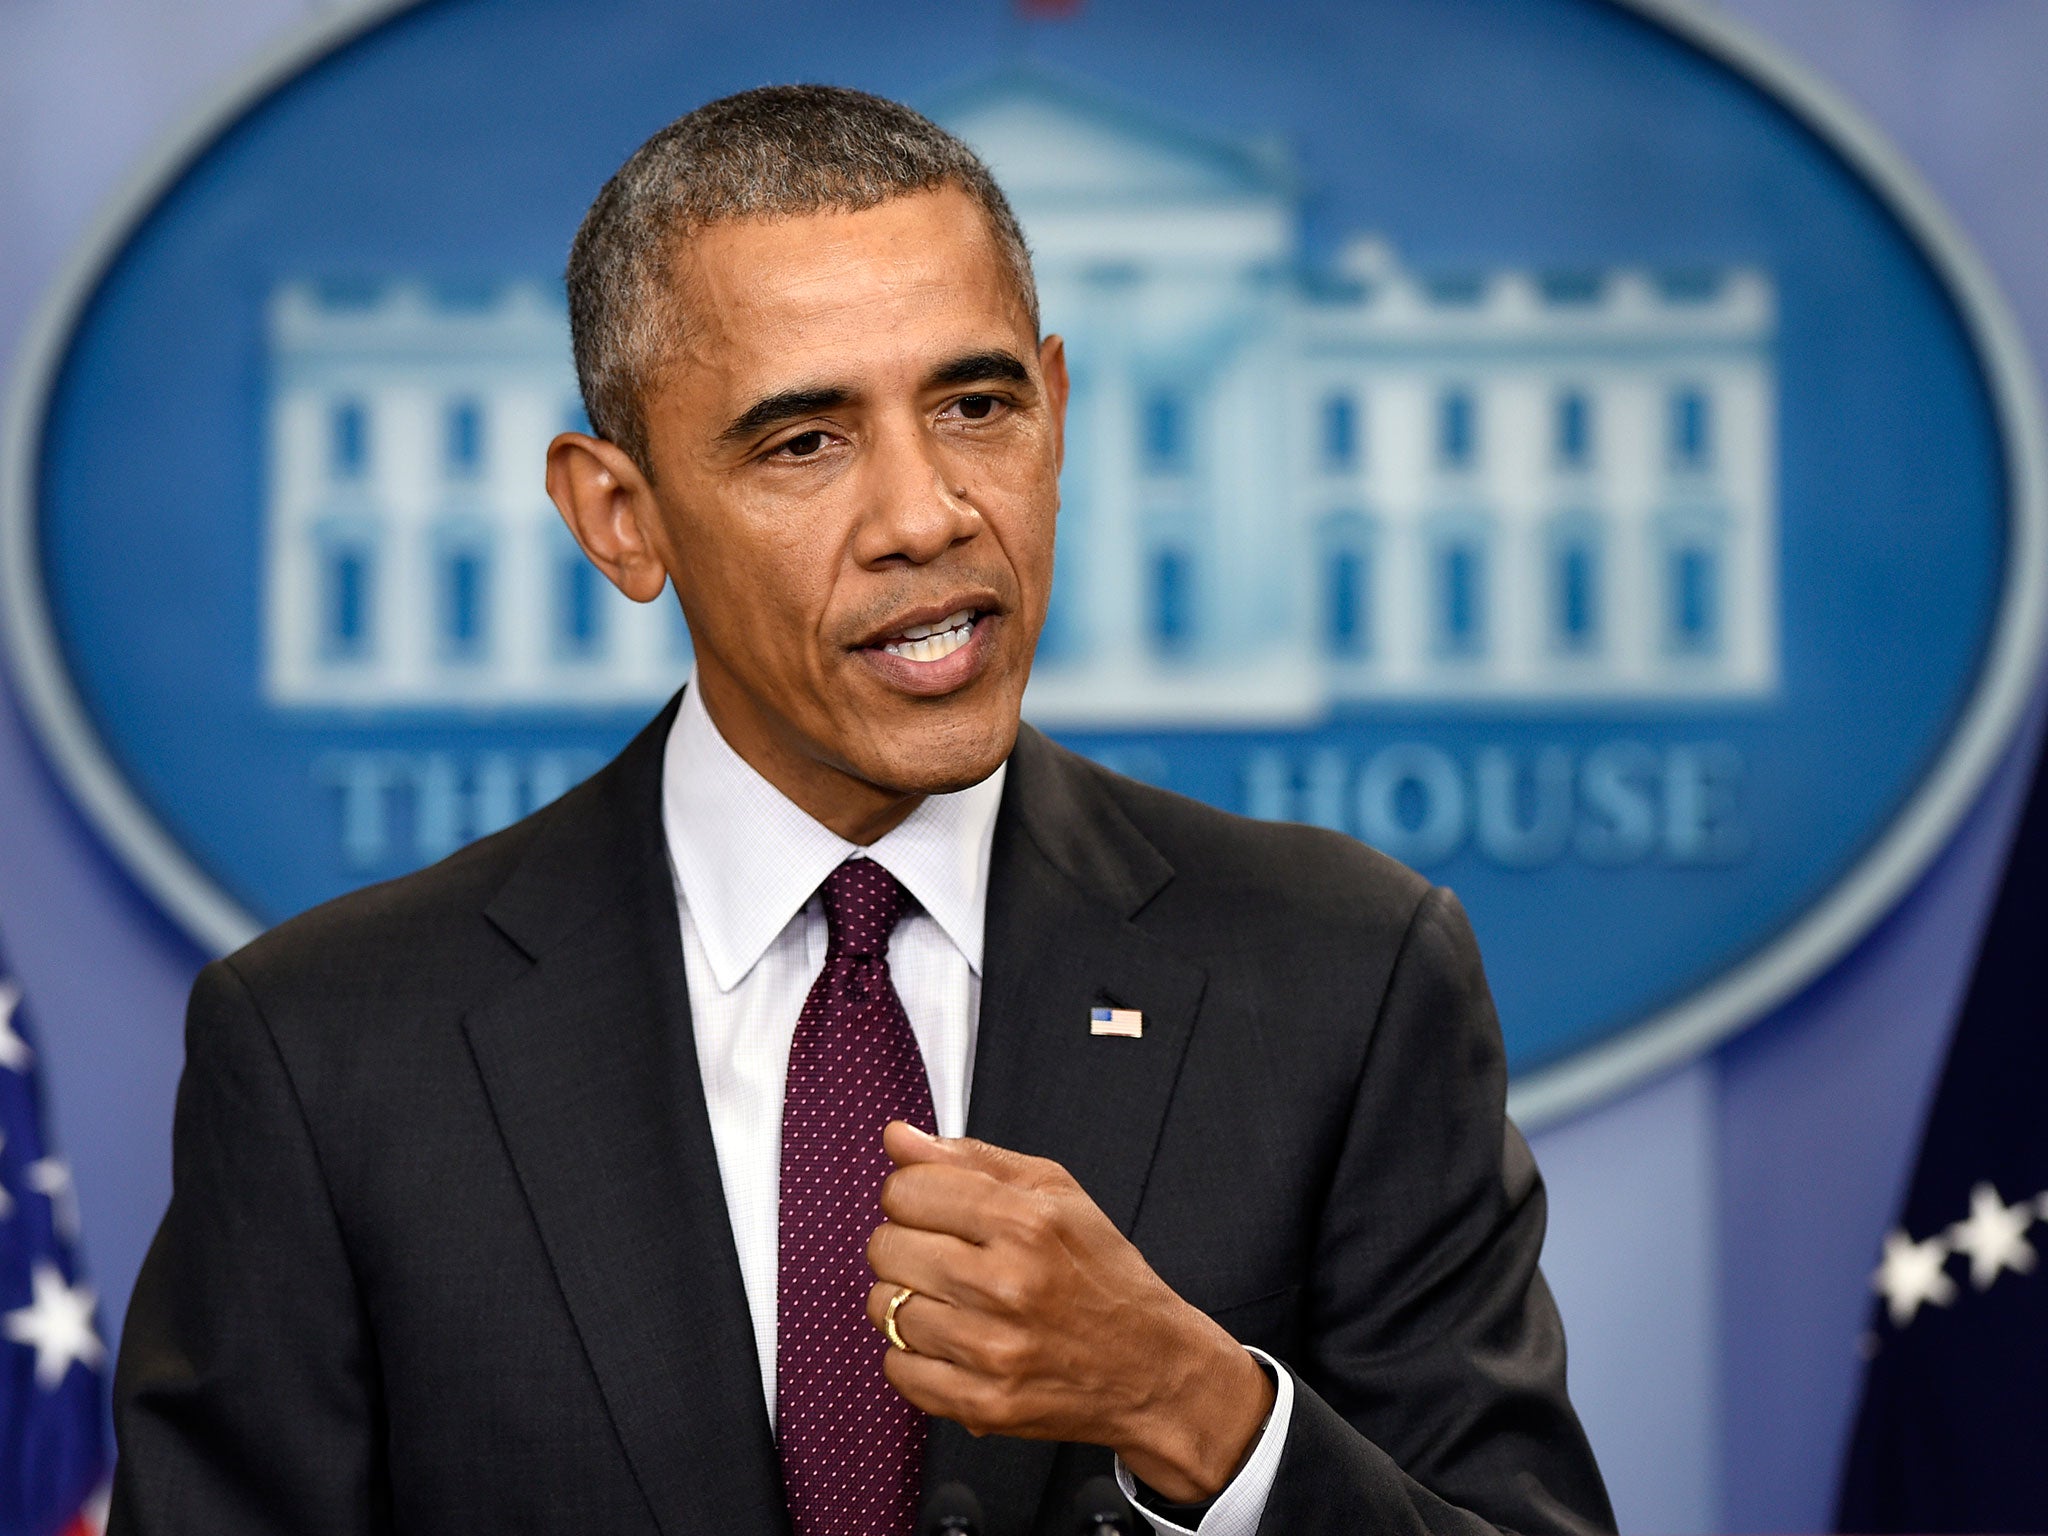 President Barack Obama speaks in the Brady Press Briefing Room at the White House in Washington, Thursday, Oct. 1, 2015, about the shooting at Umpqua Community College in Roseburg, Oregon